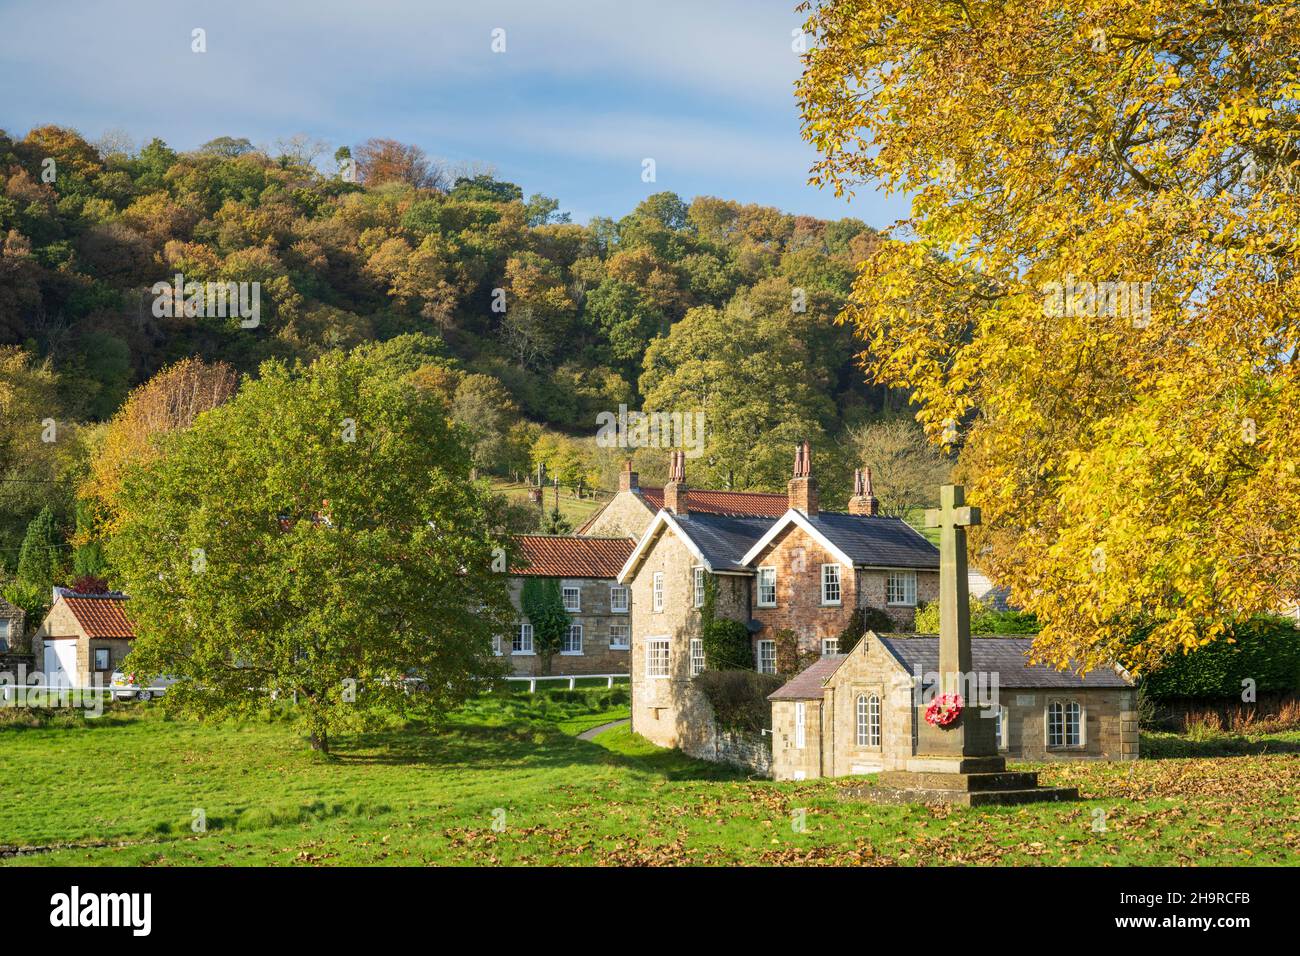 Autumn leaves and stone cottages at moorland village Hutton Le Hole, The North Yorkshire Moors, England. Stock Photo